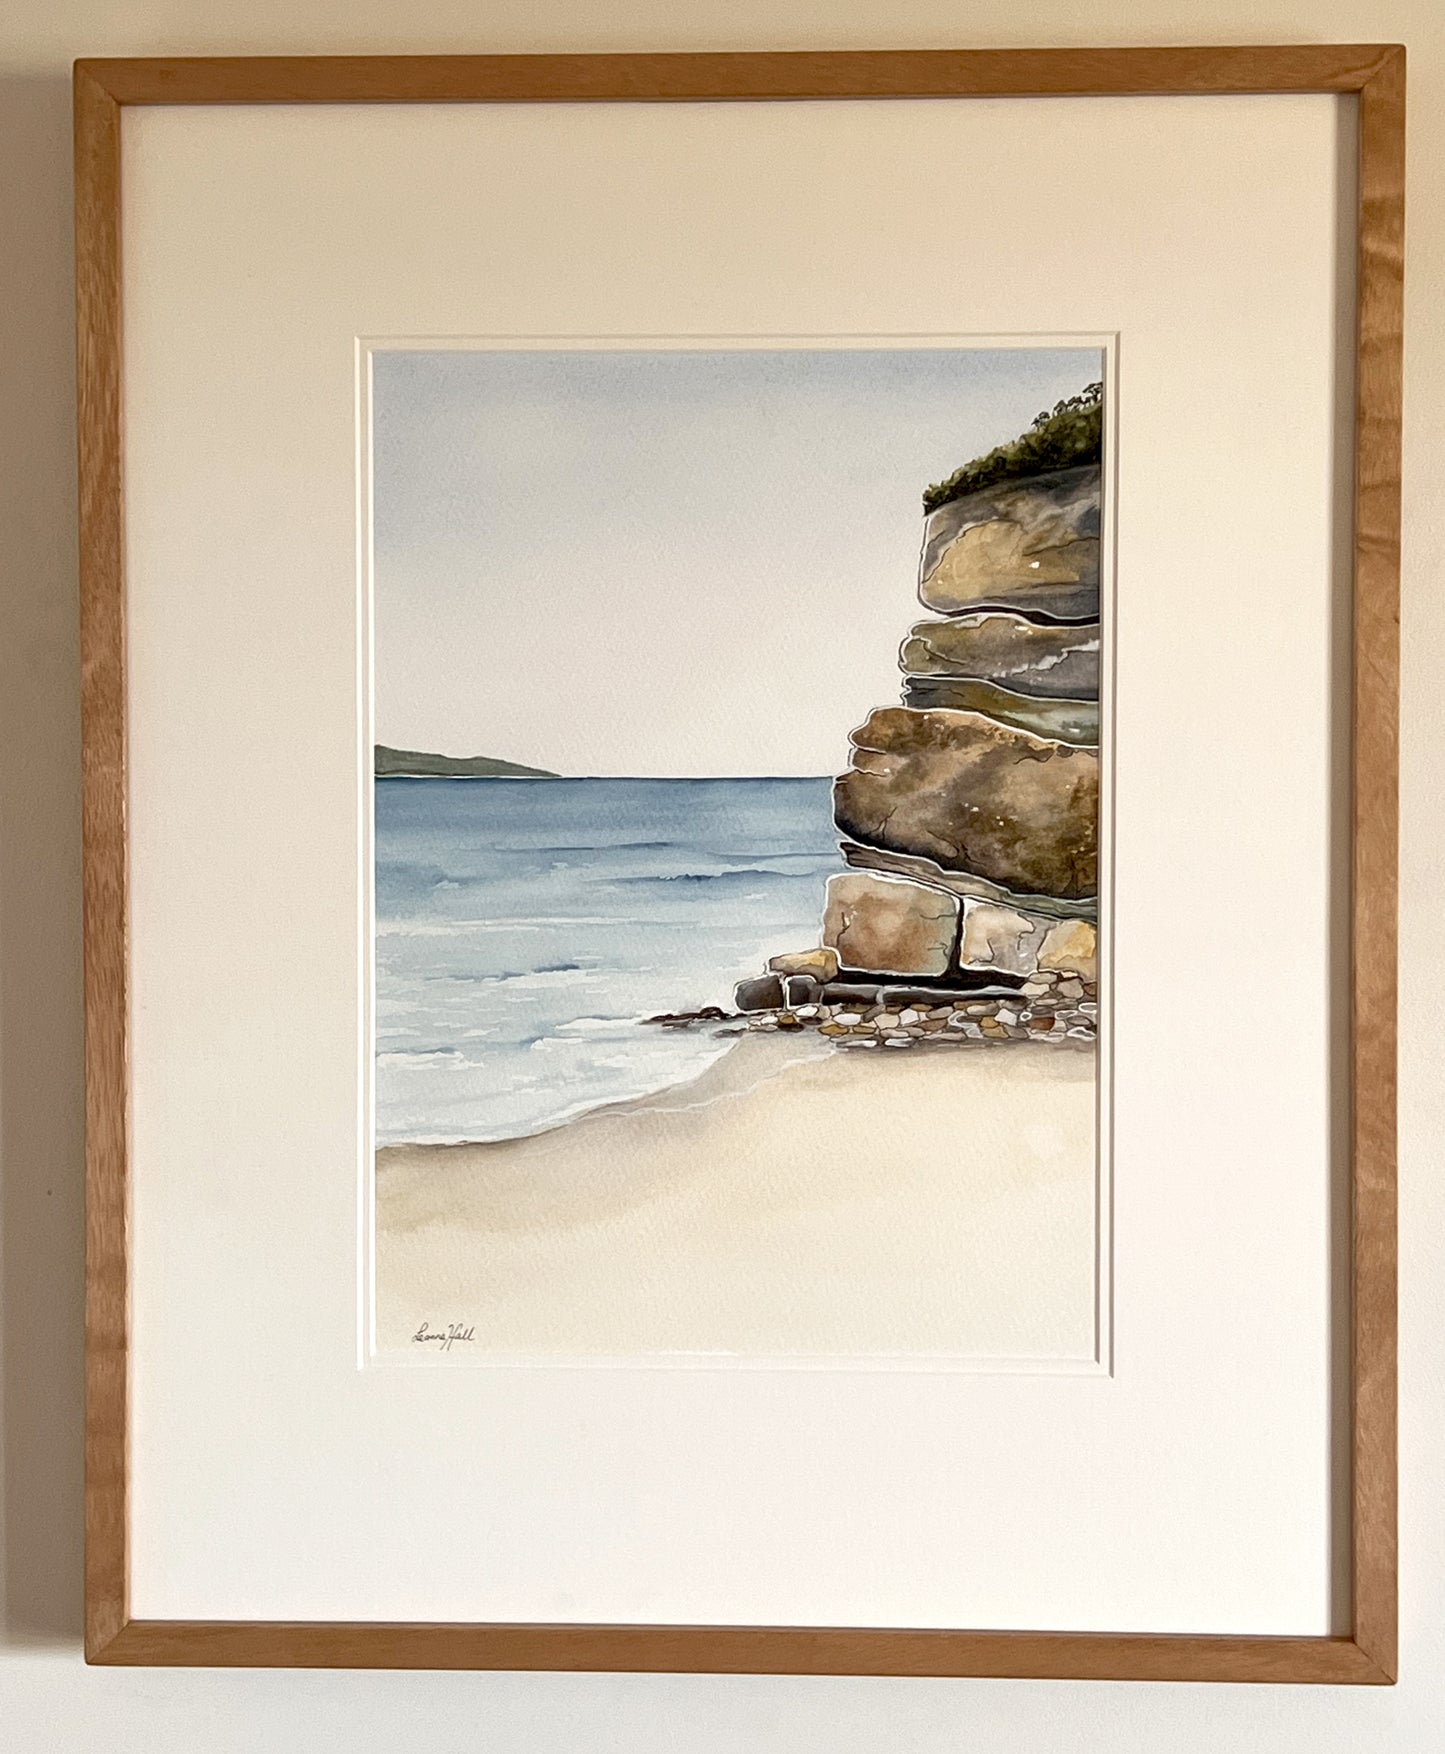 Peaceful Cove - framed watercolour painting by Leanne Hall